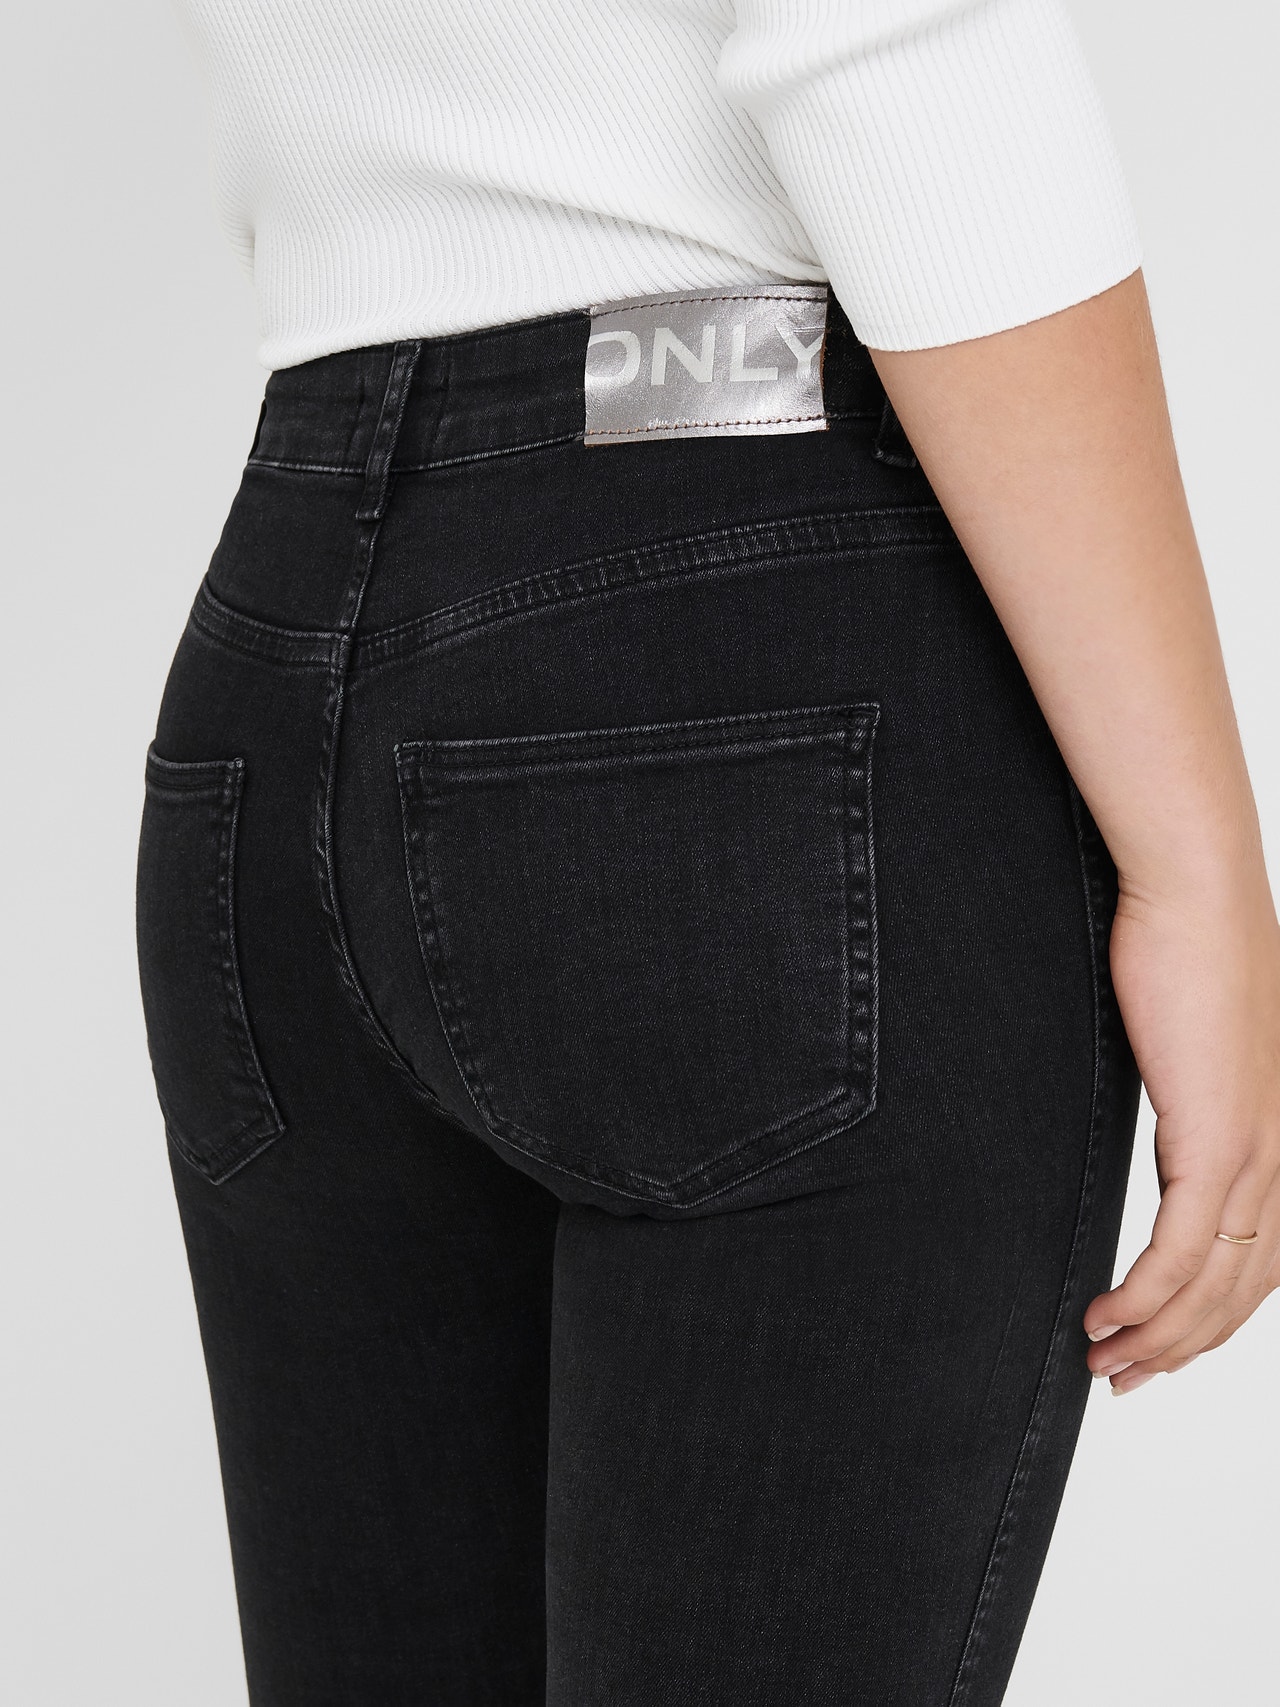 ONLY Skinny Fit Mid waist Jeans -Black - 15210080